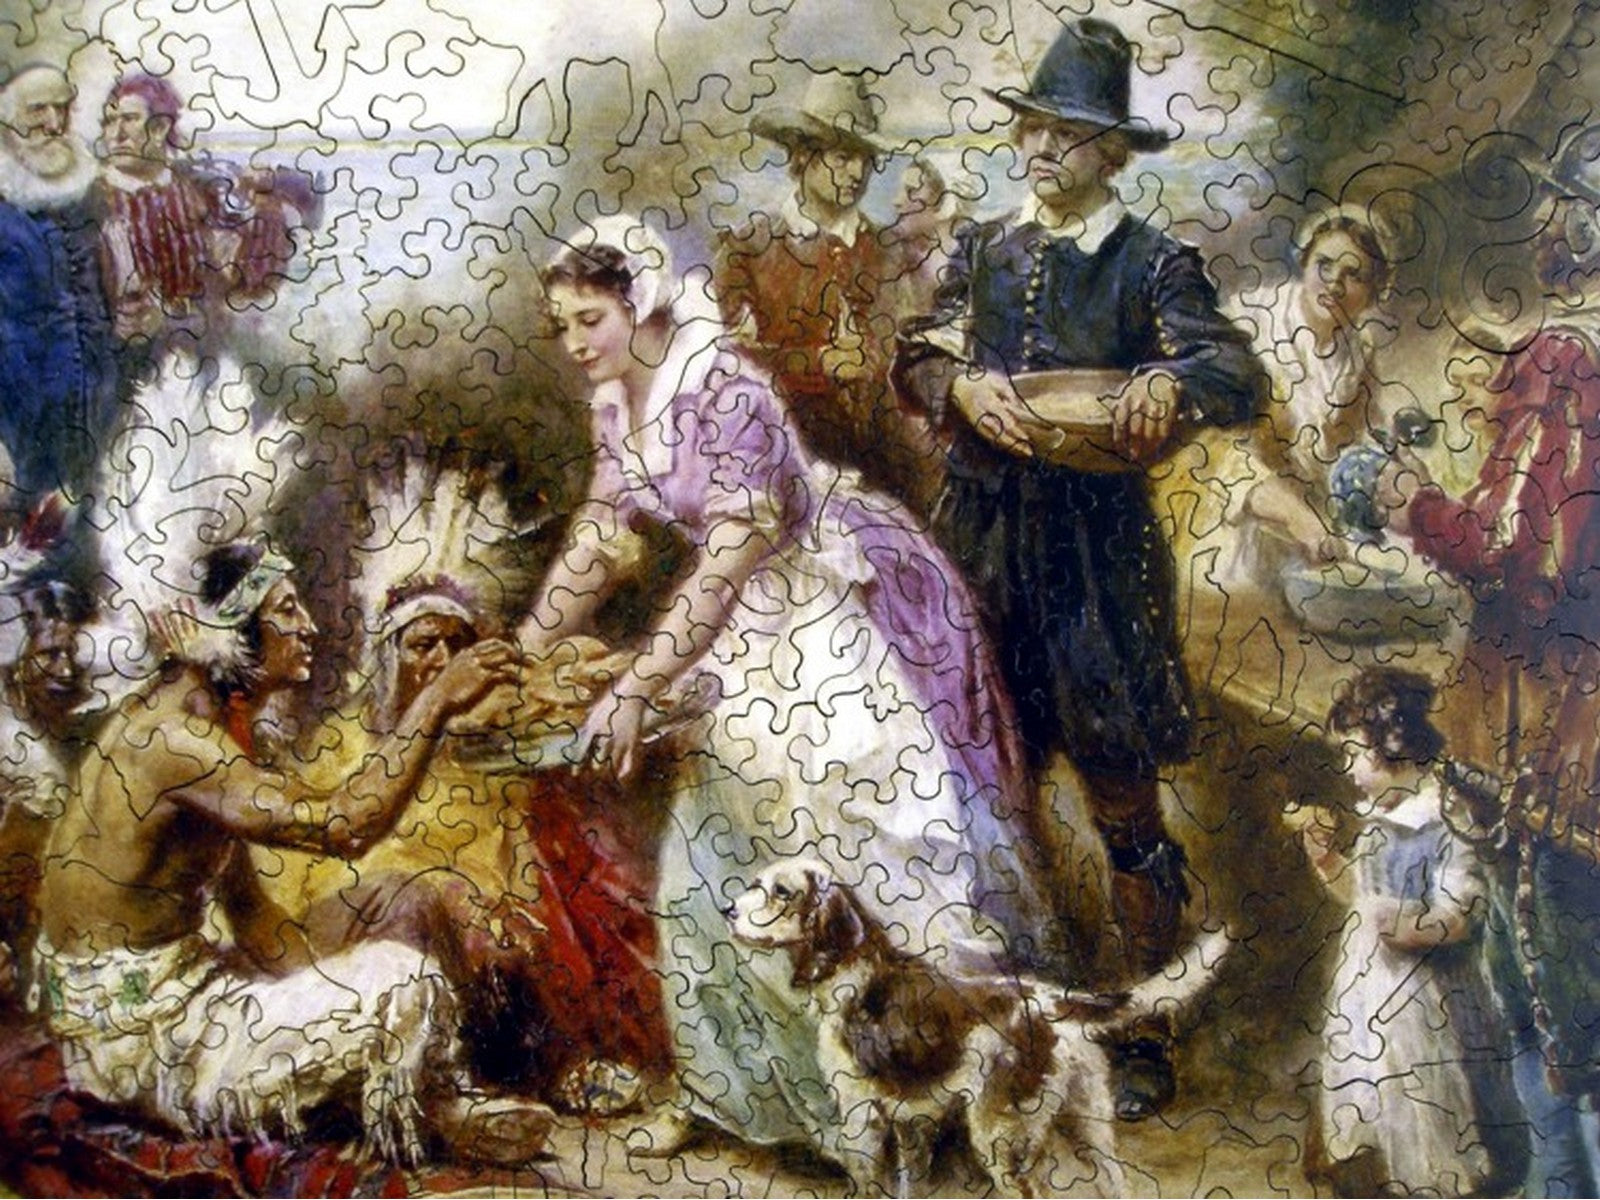 A closeup of the front of the puzzle, The First Thanksgiving, 1621.